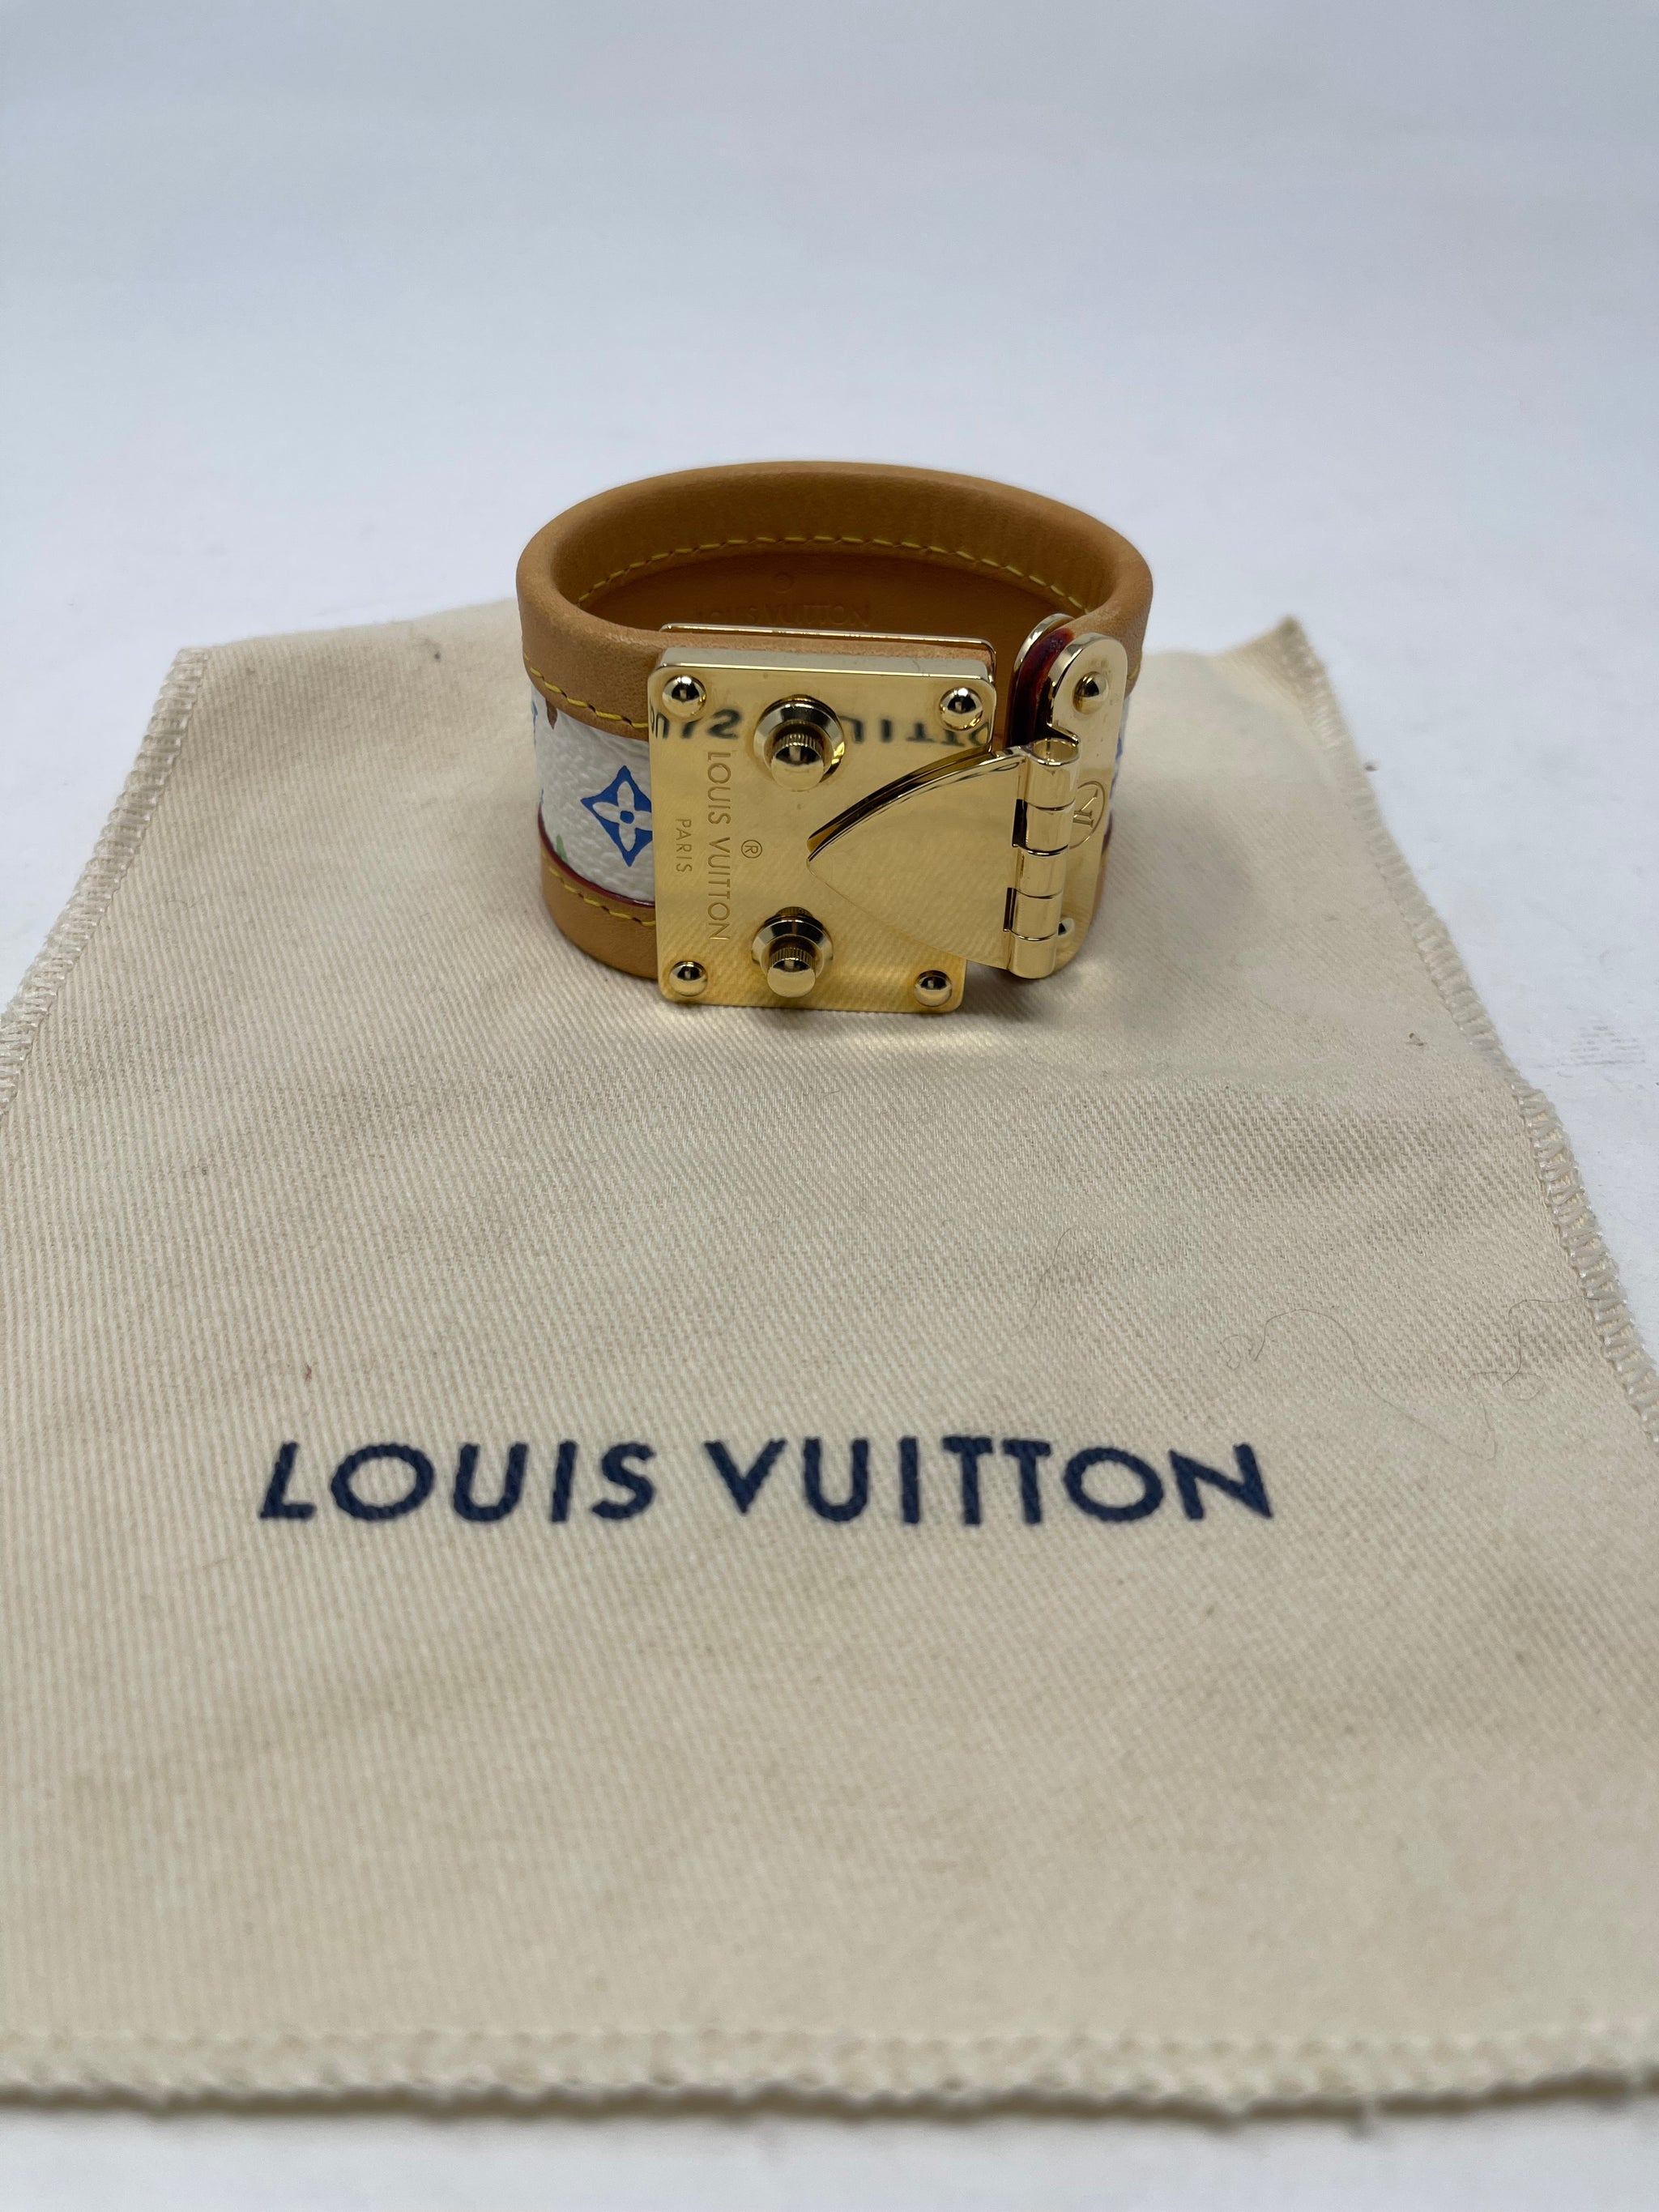 Monogram leather bracelet Louis Vuitton Brown in Leather - 38052981